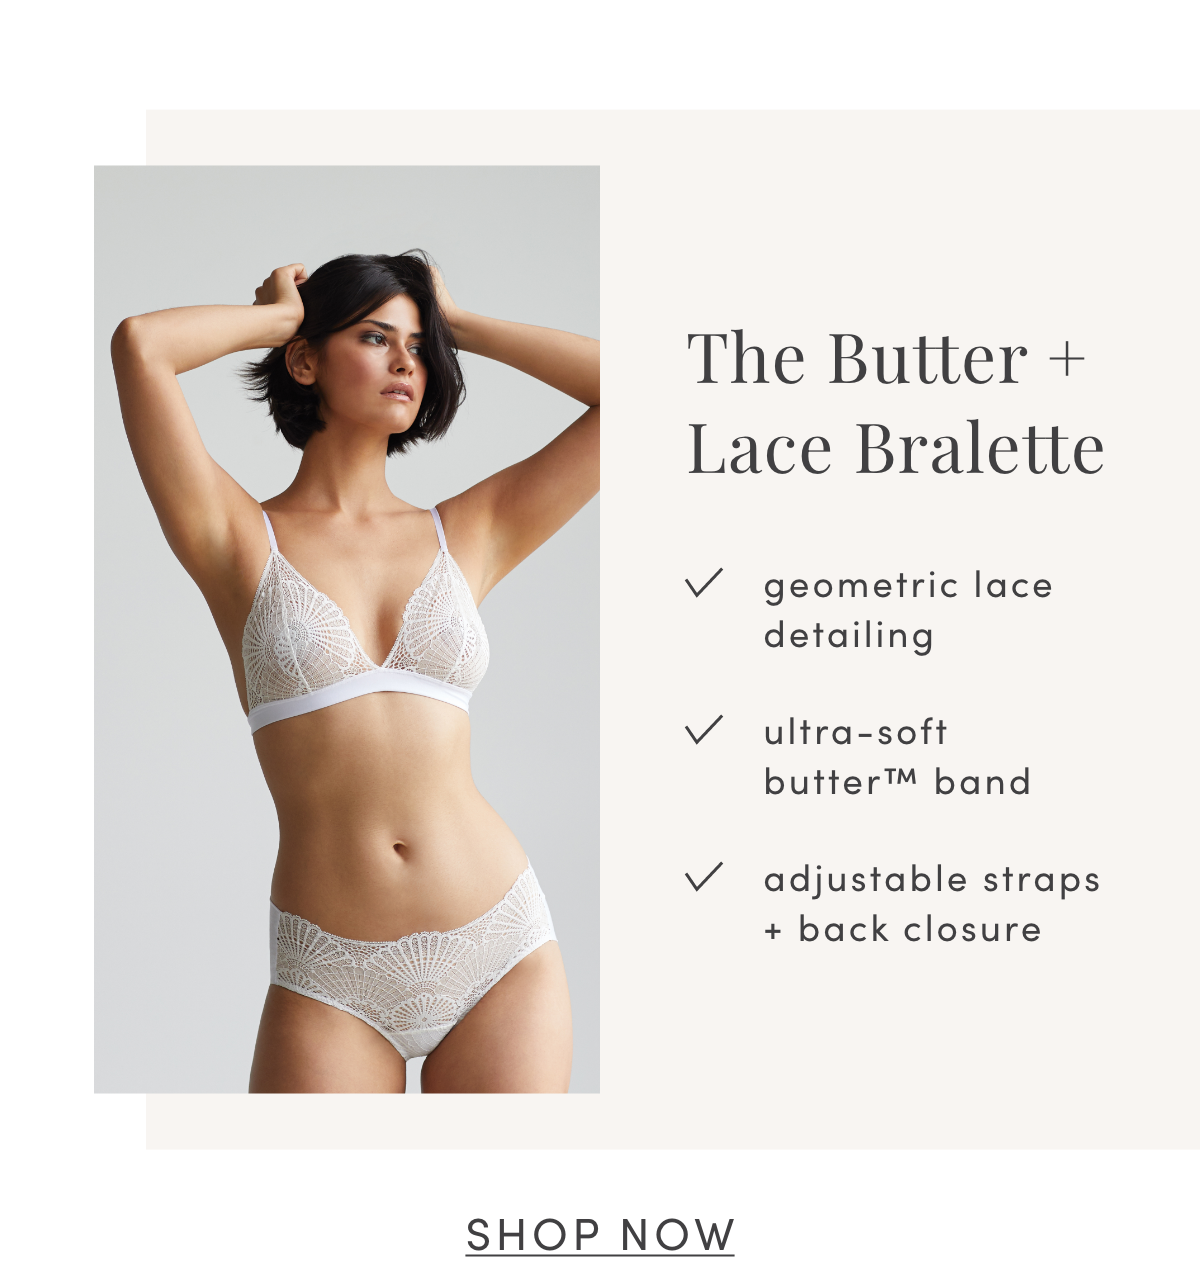 The Butter + Lace Bralette